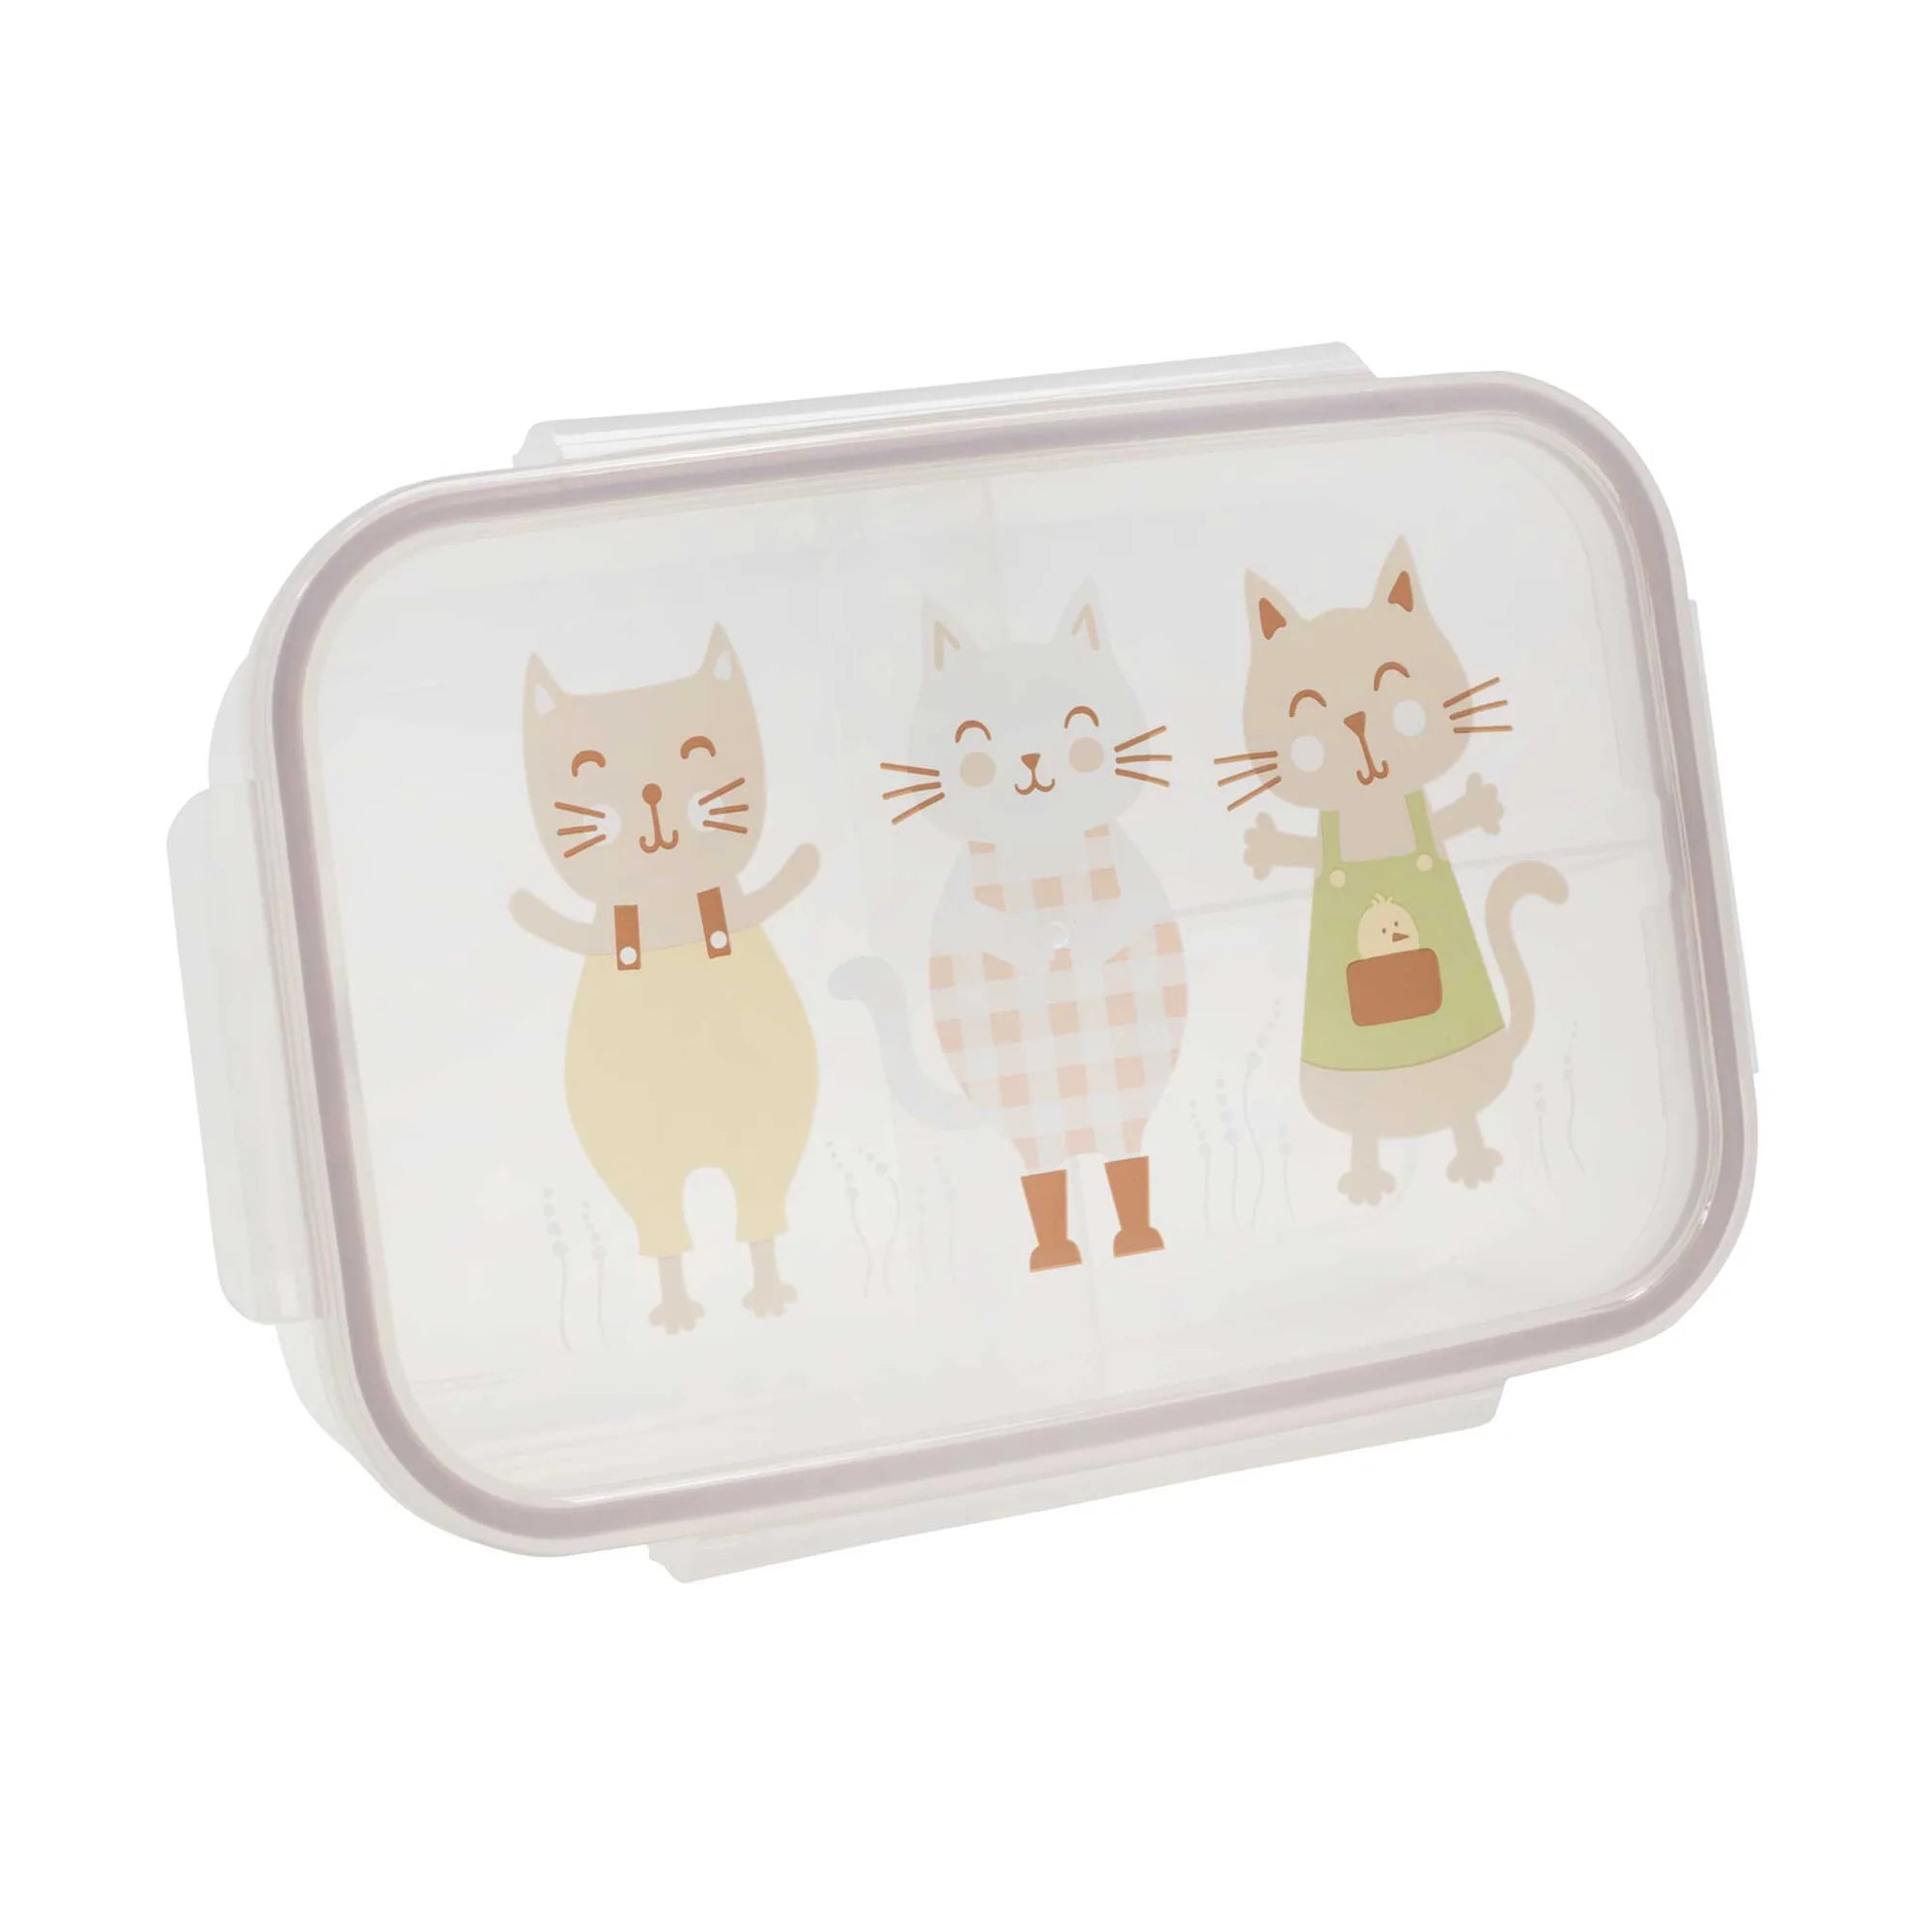 On a white background is a clear plastic bento box with three kitty graphics on the lid filled here with a lunch.